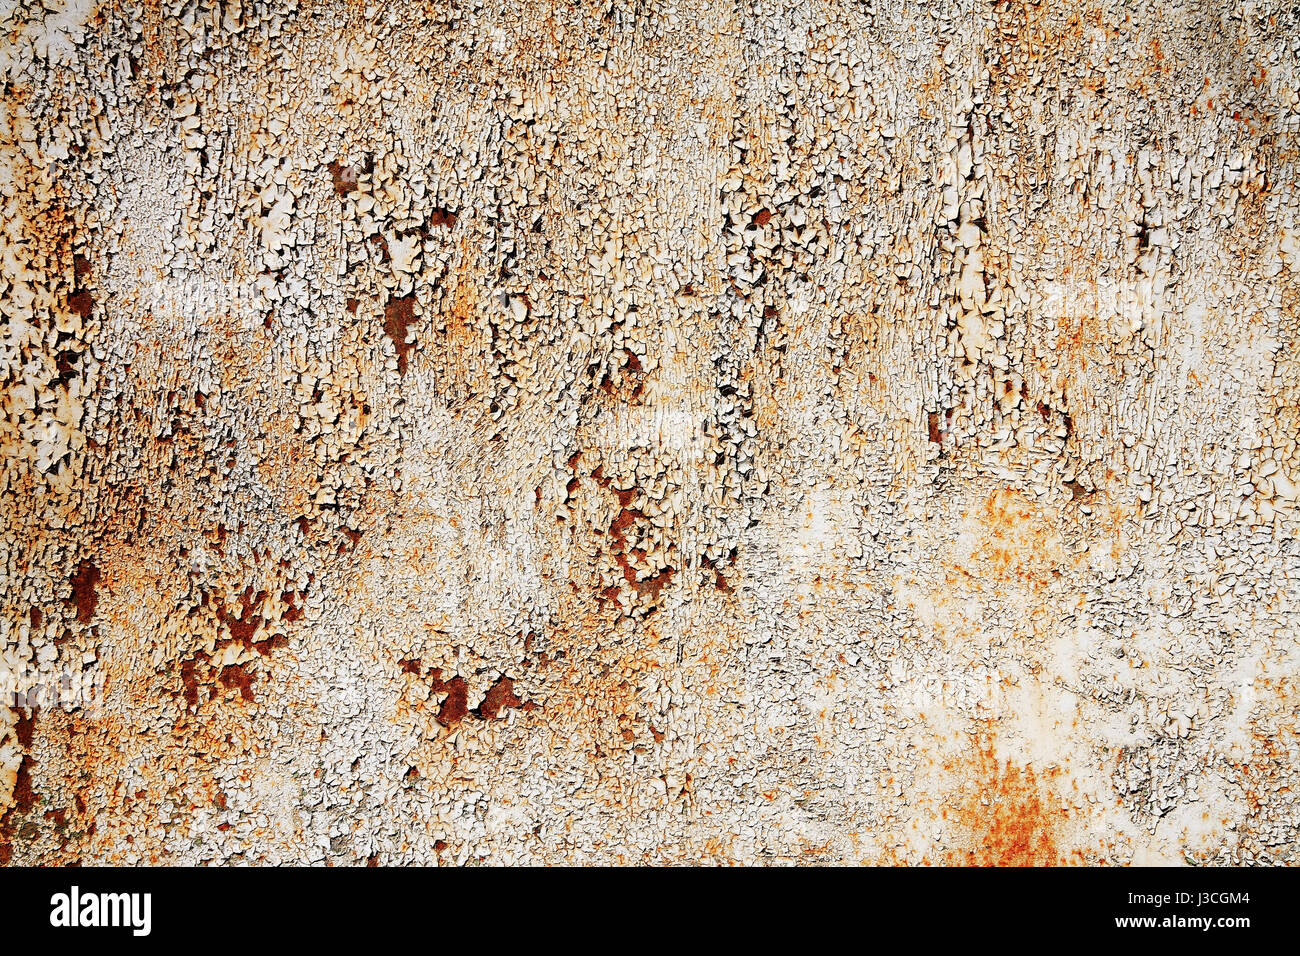 Rusted surface close-up, corrosion of metal Stock Photo